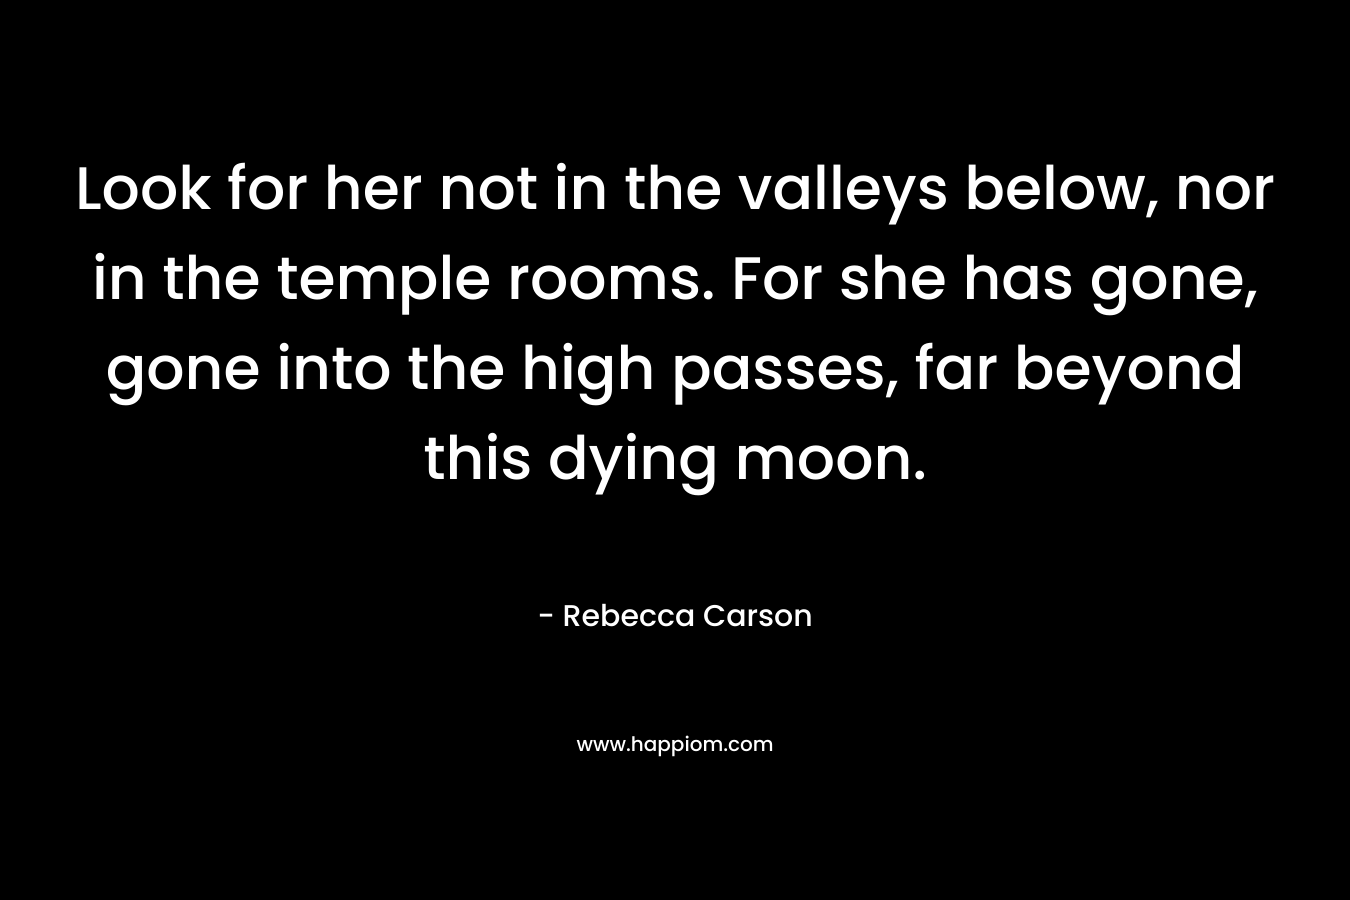 Look for her not in the valleys below, nor in the temple rooms. For she has gone, gone into the high passes, far beyond this dying moon. – Rebecca Carson